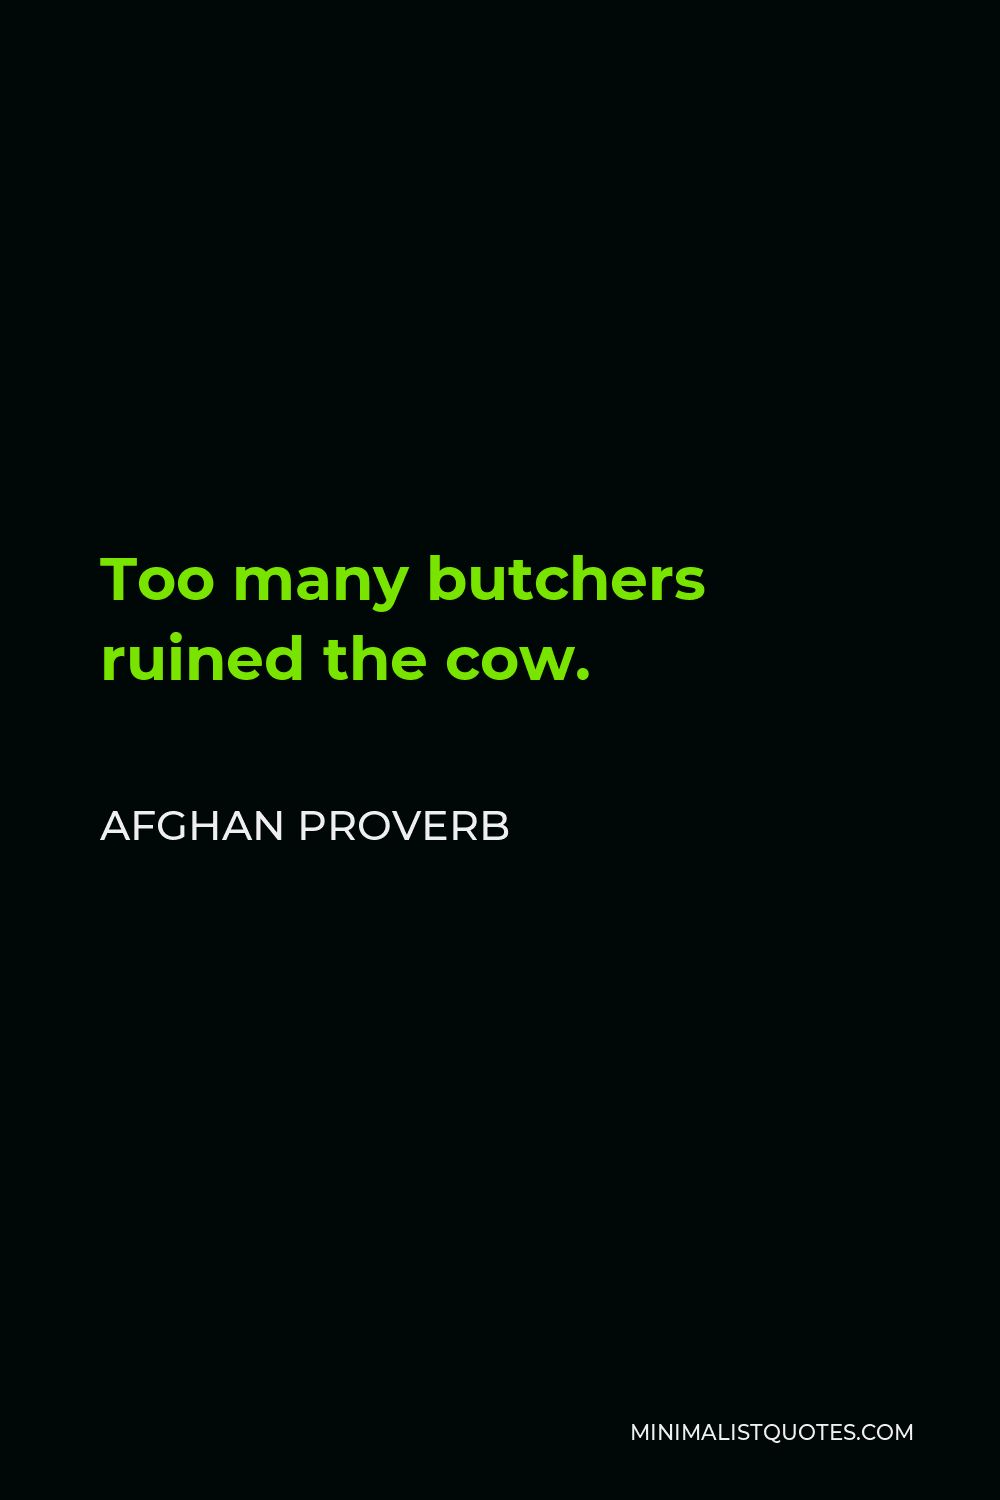 Afghan Proverb Quote - Too many butchers ruined the cow.